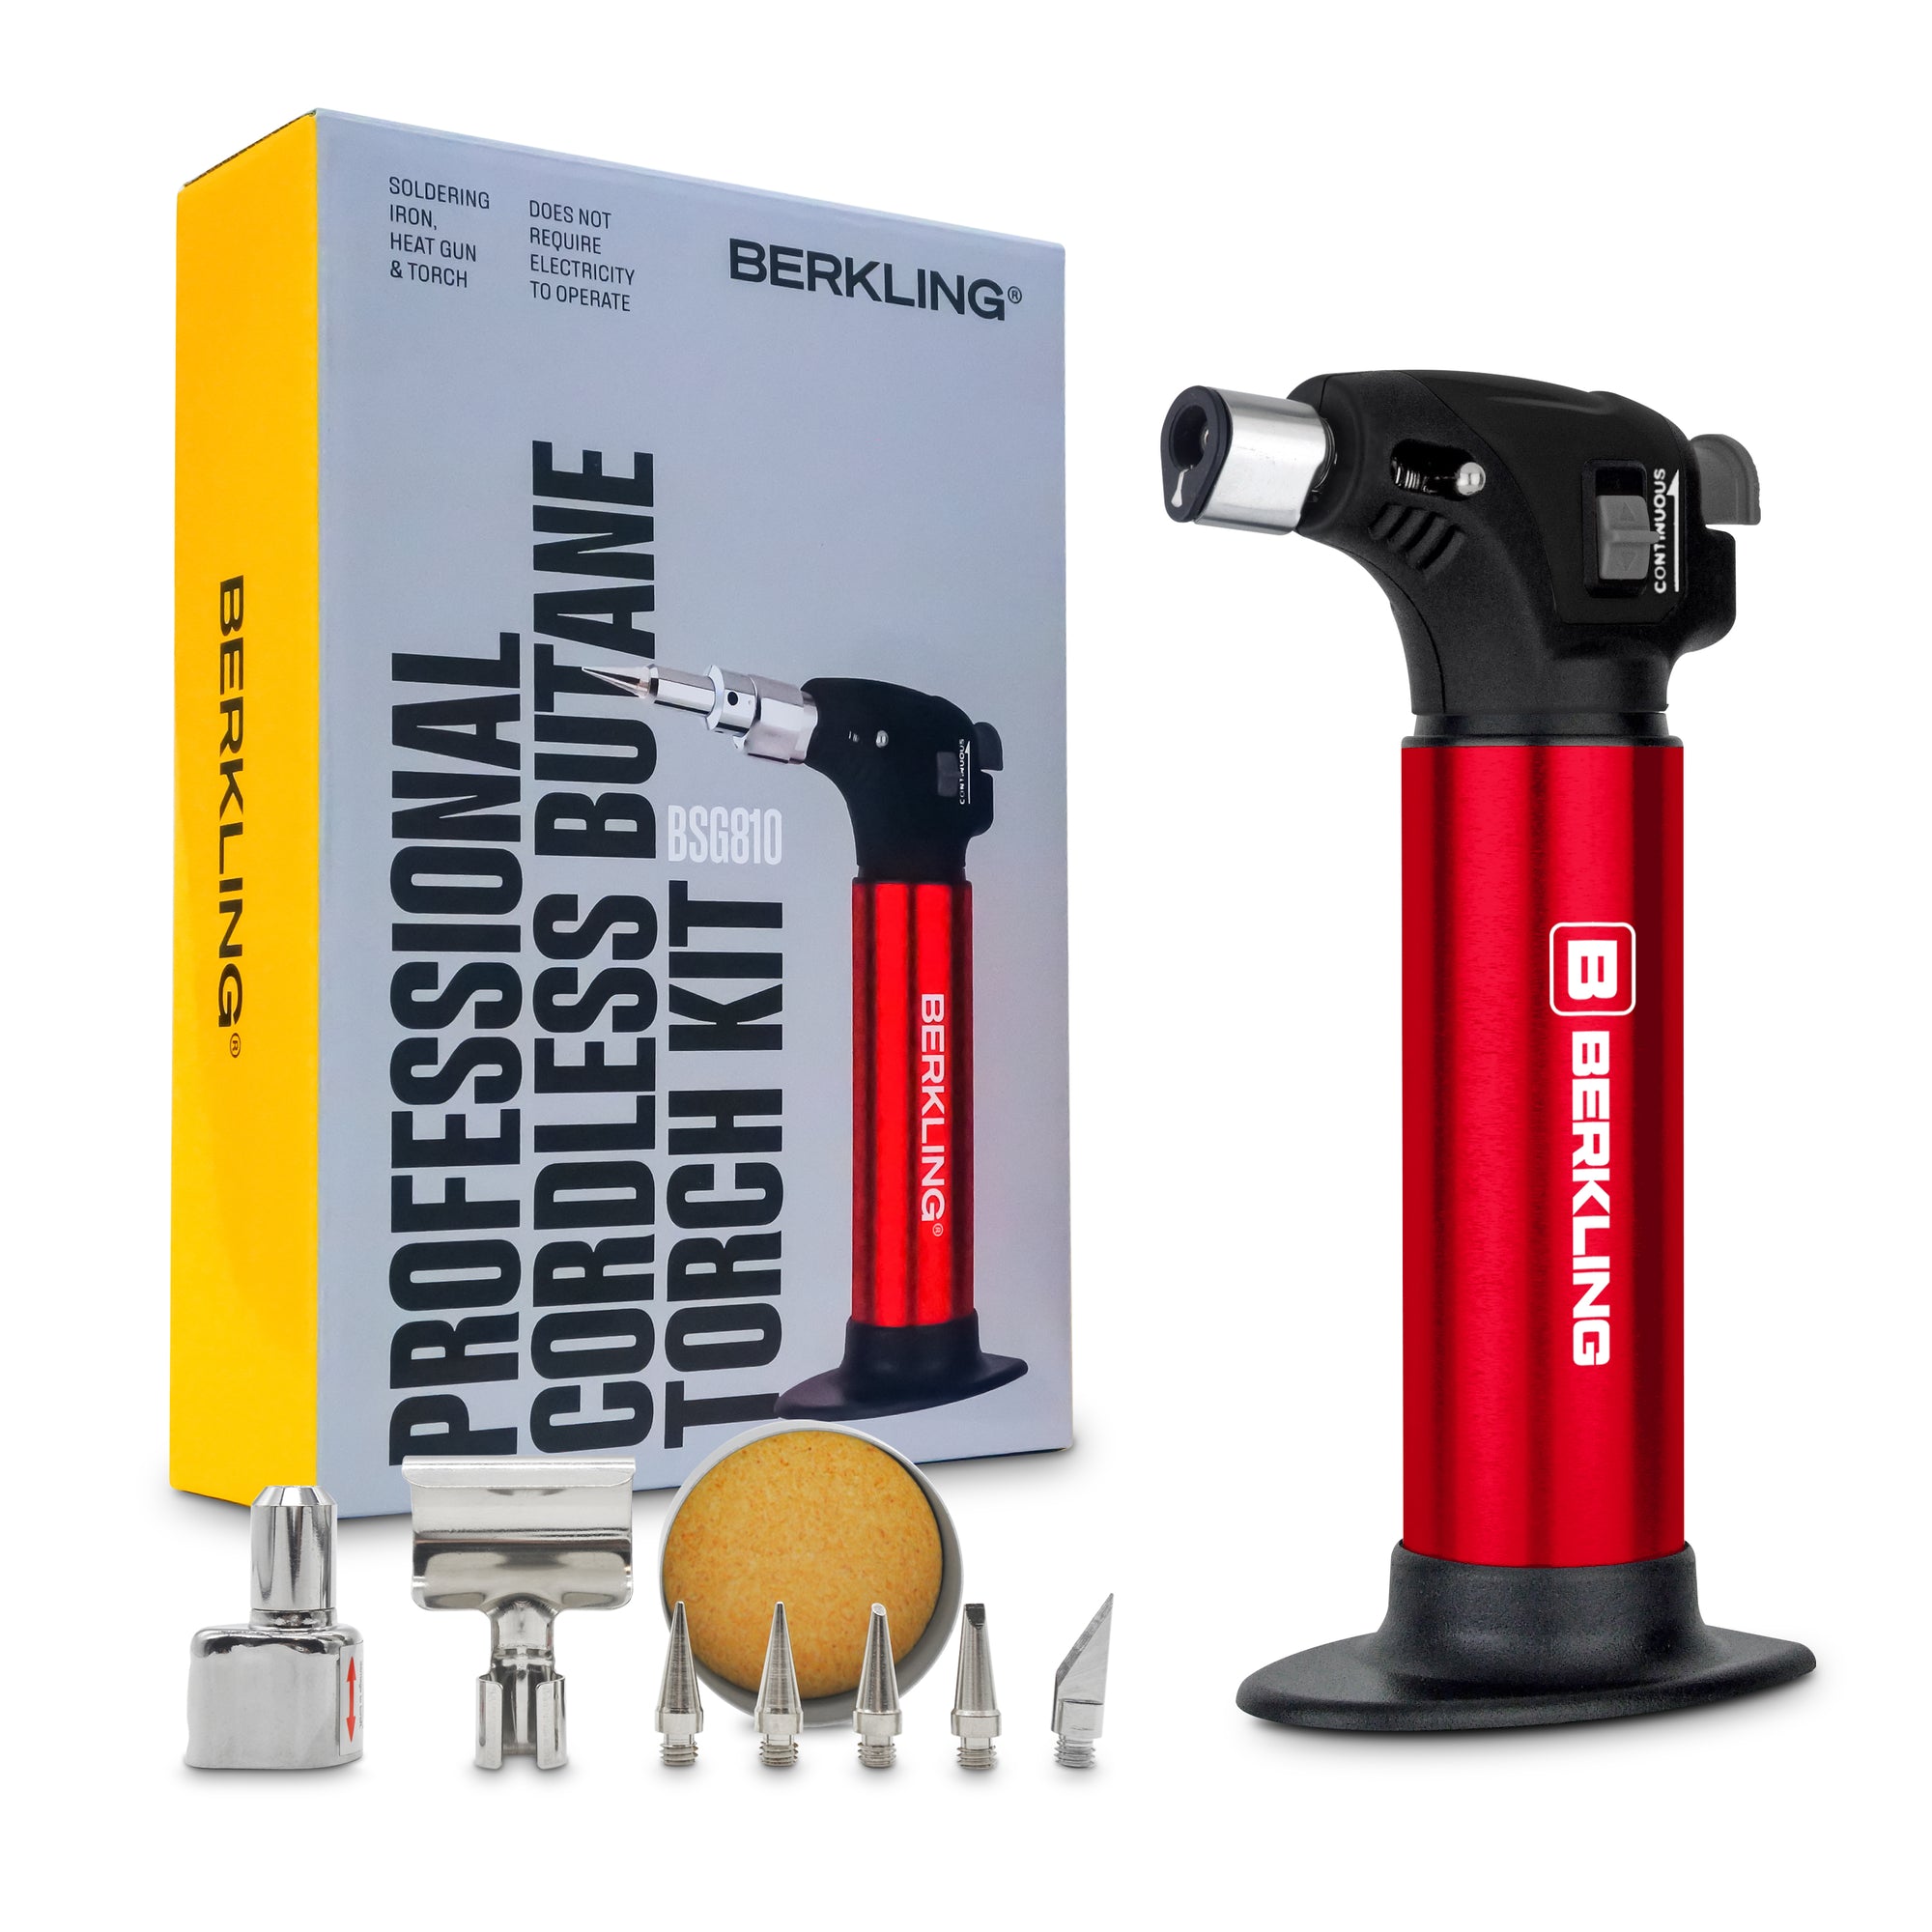 BSG-810 Cordless Butane Soldering Torch Lighter Kit – Multifunctional Butane Micro Torch Can Use as Soldering Iron and Heat Blower.